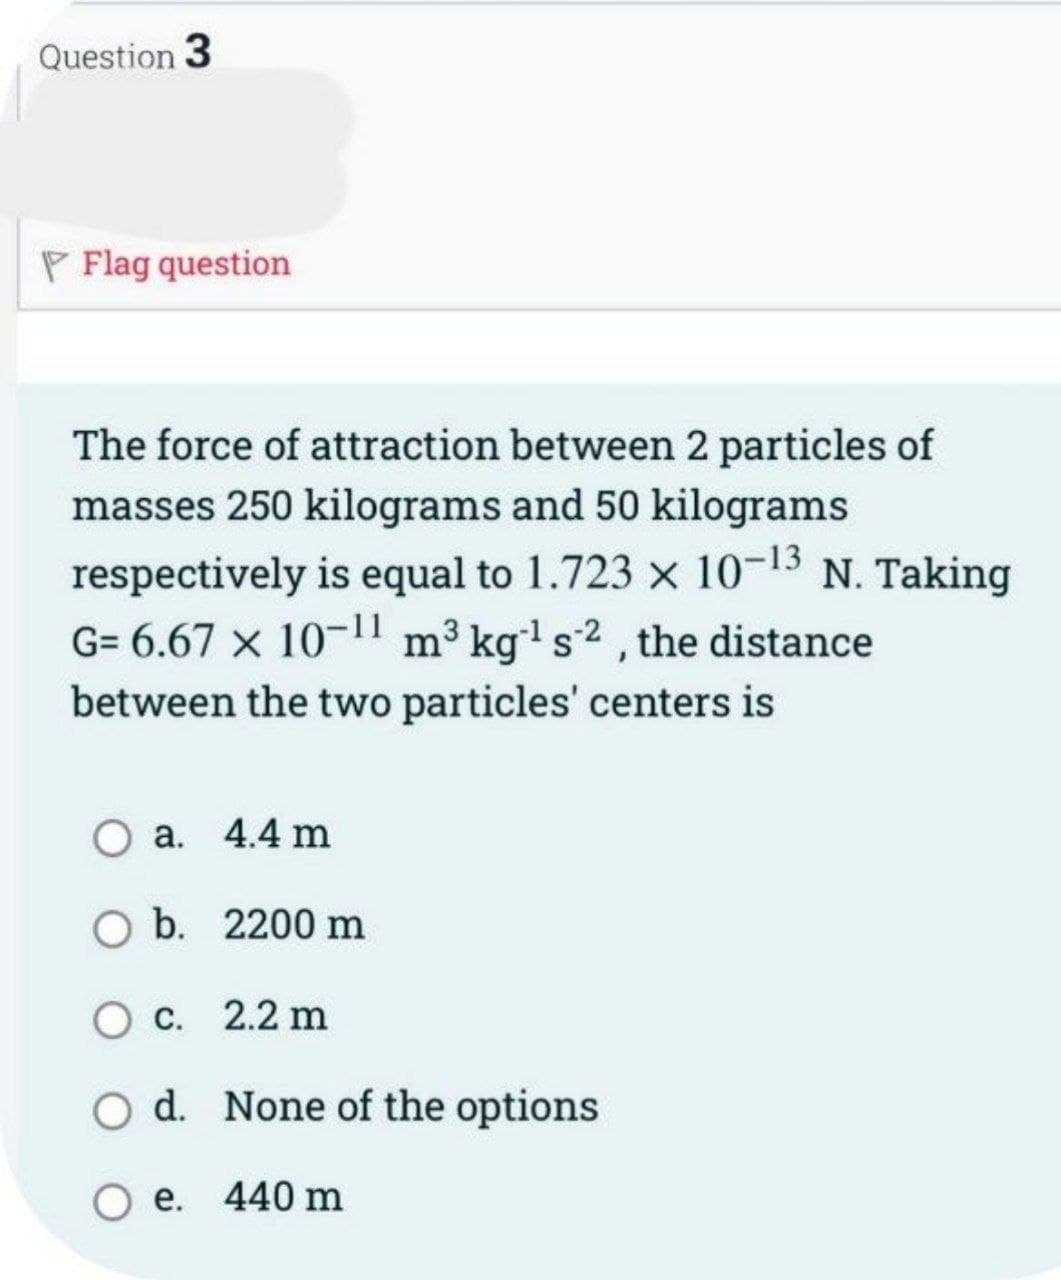 Question 3
PFlag question
The force of attraction between 2 particles of
masses 250 kilograms and 50 kilograms
respectively is equal to 1.723 x 10-13 N. Taking
G= 6.67 × 10-¹1 m³ kg-¹ s2, the distance
between the two particles' centers is
O a. 4.4 m
O b. 2200 m
O c. 2.2 m
d. None of the options
O e. 440 m